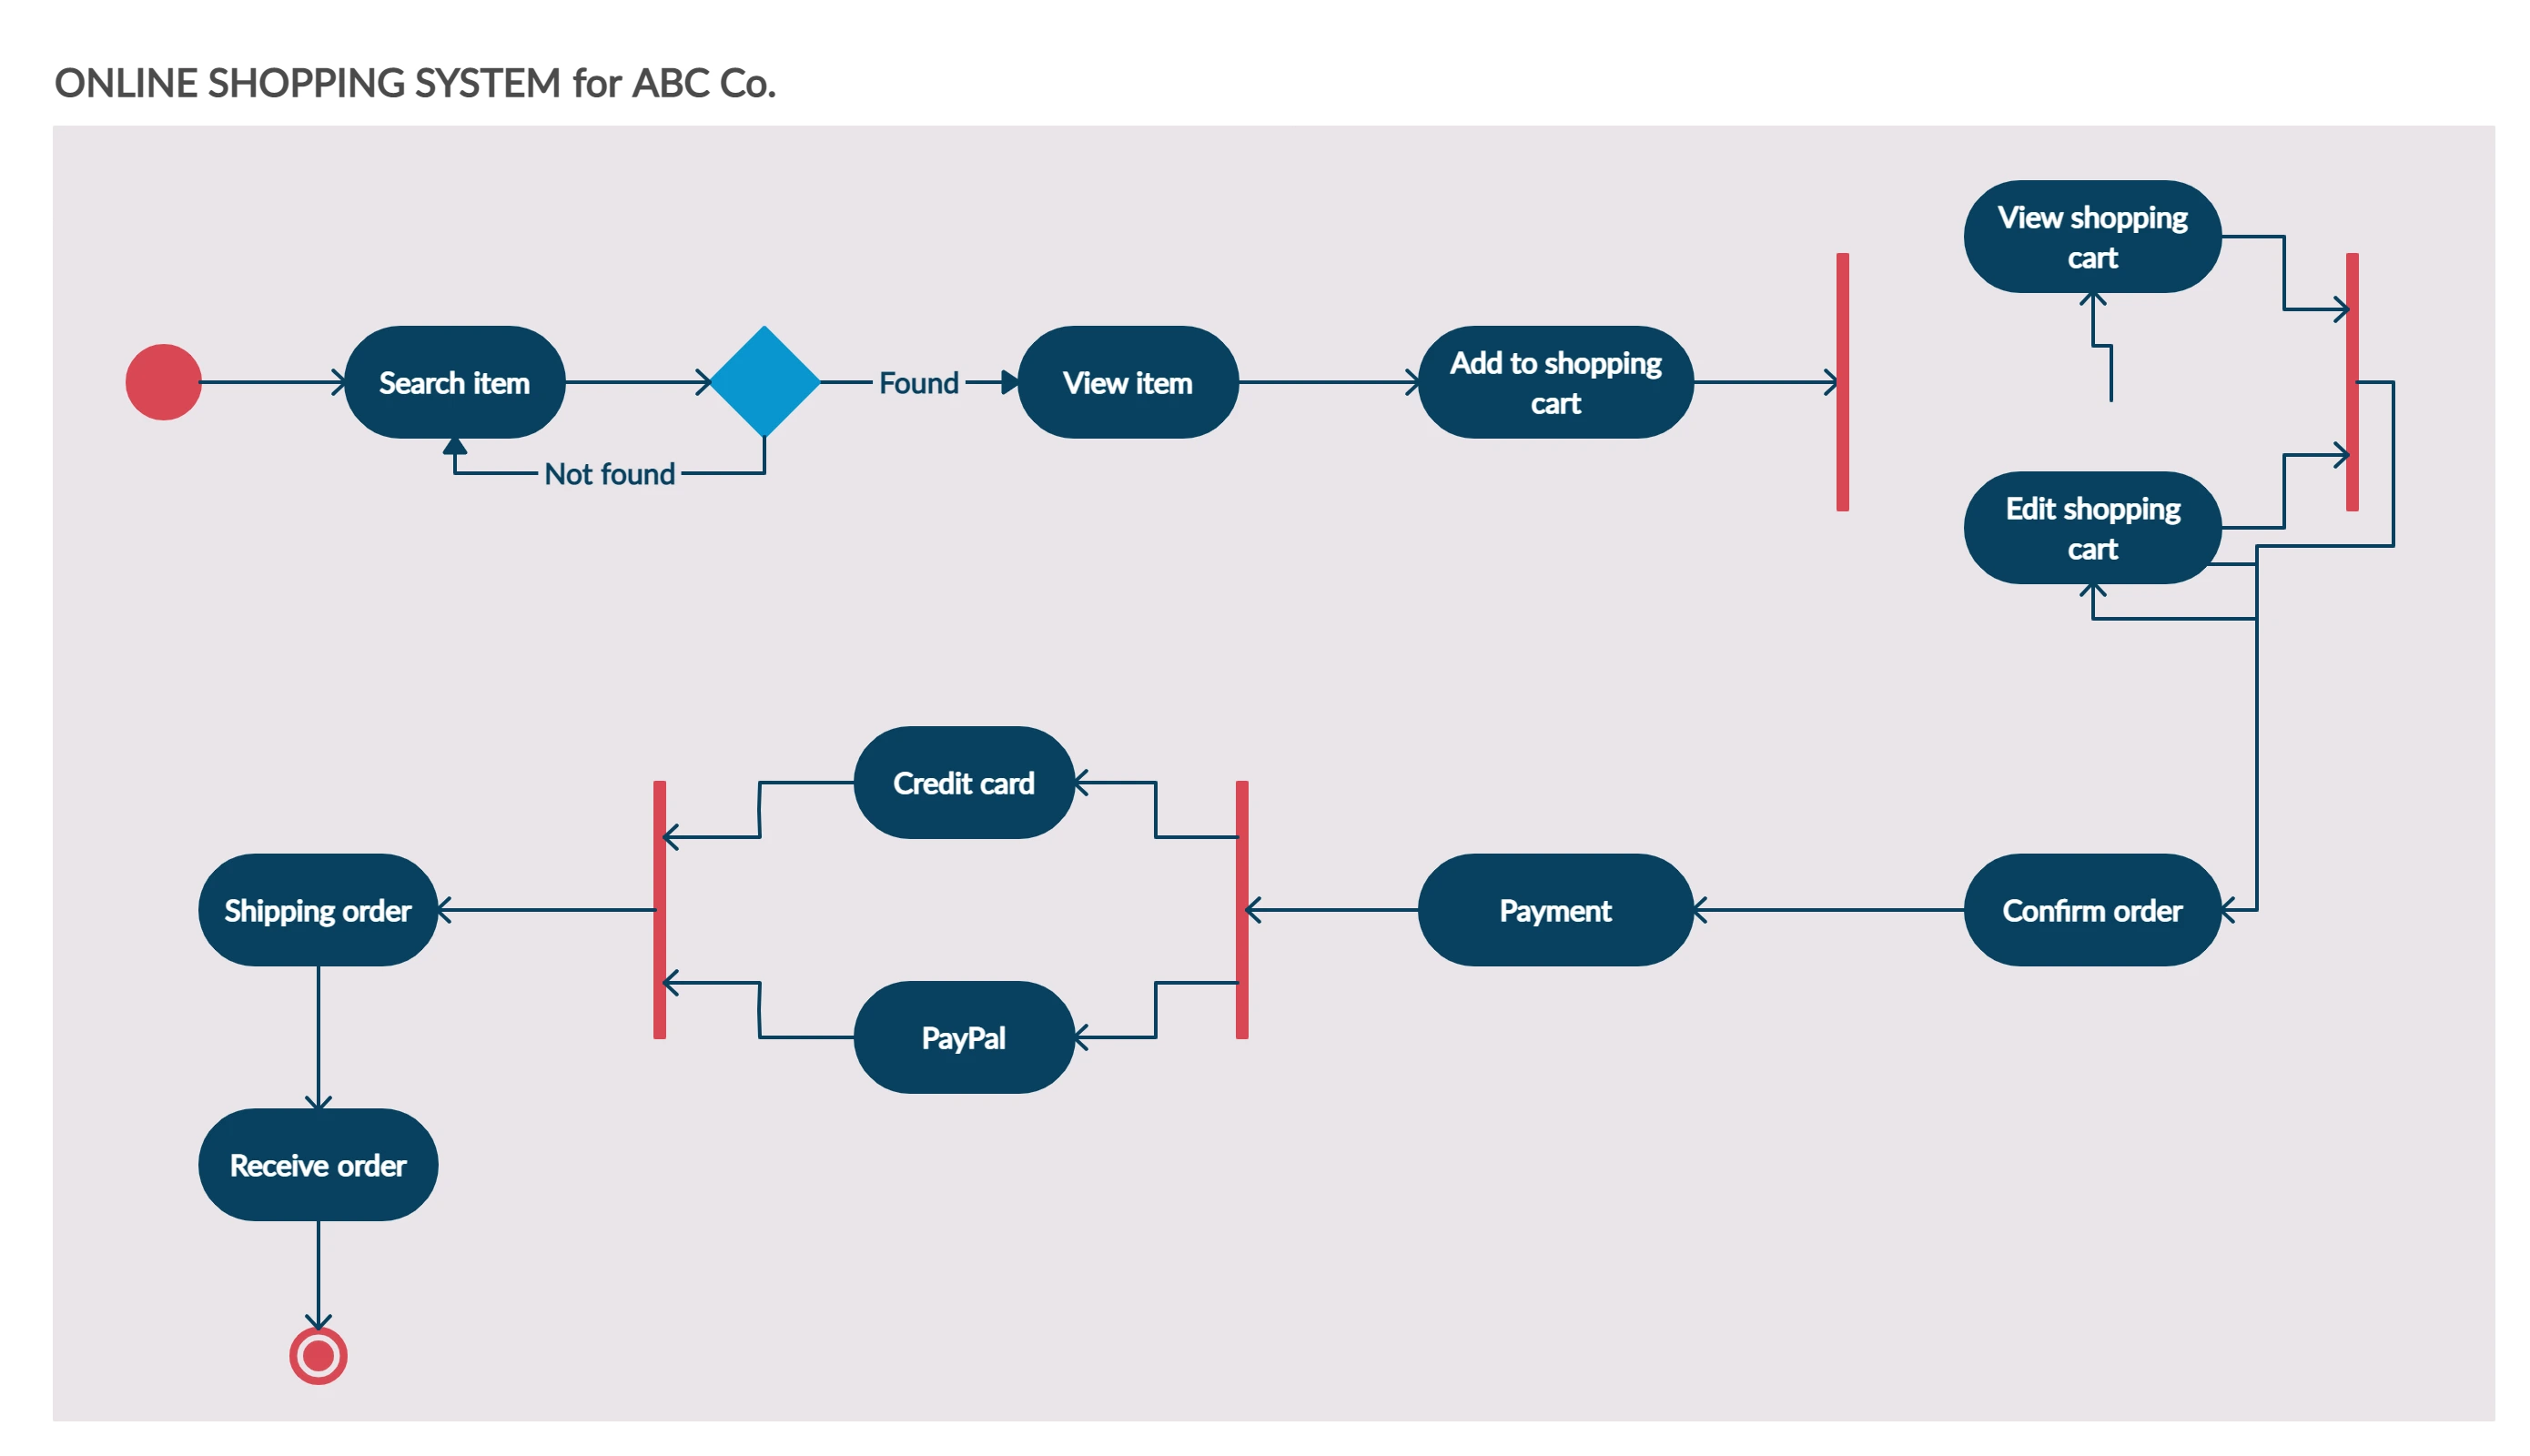 Activity Diagram for Online Shopping System